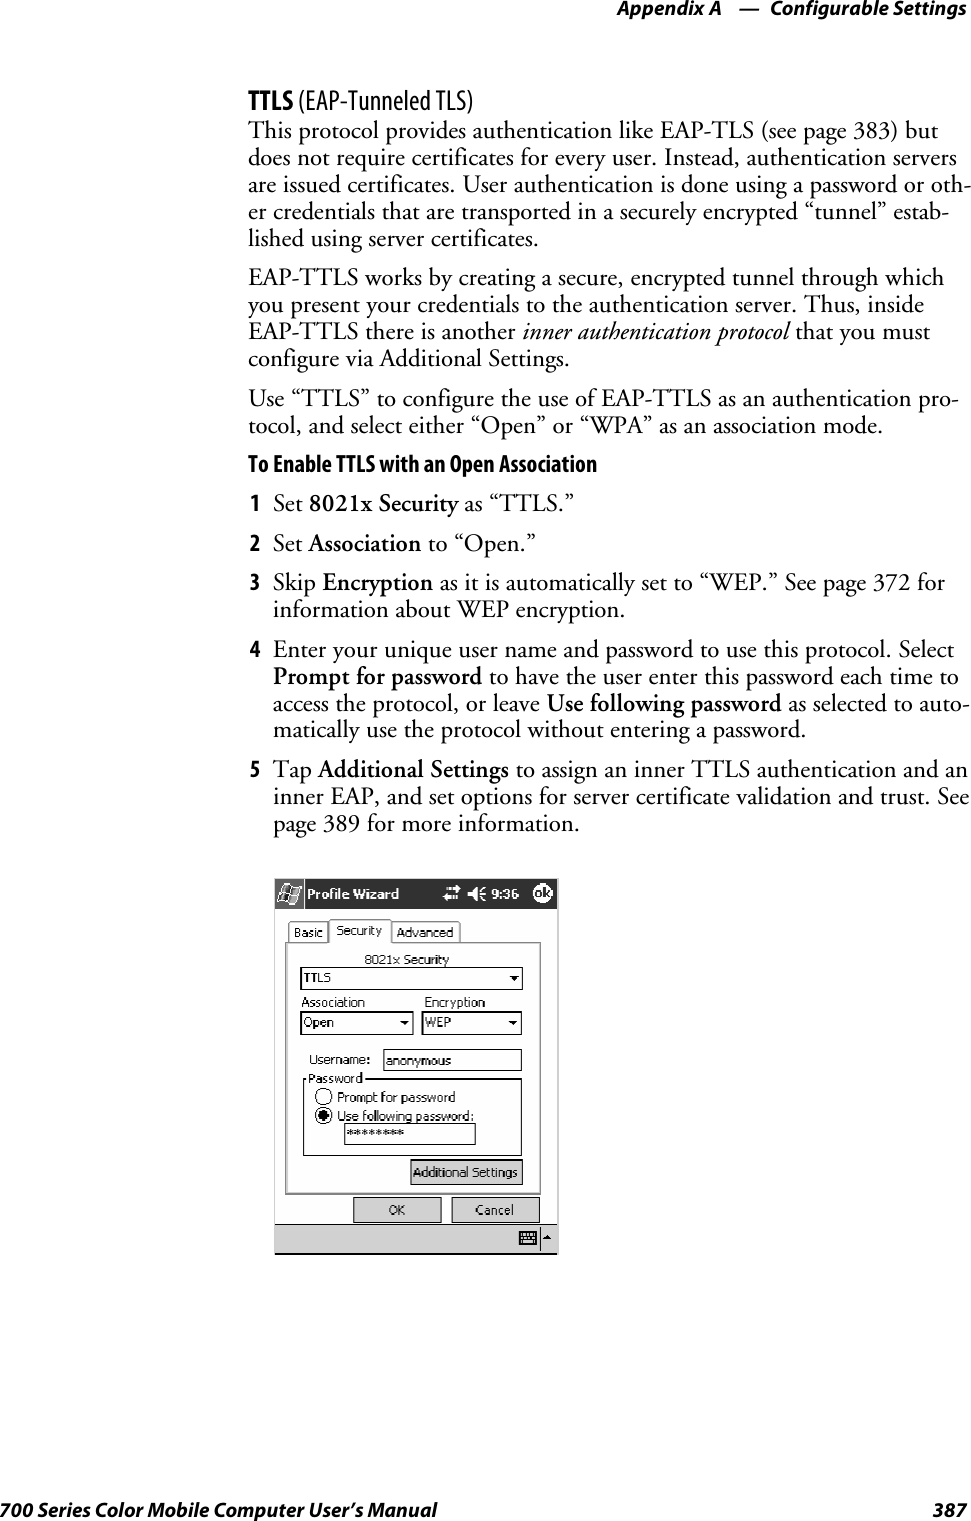 Configurable SettingsAppendix —A387700 Series Color Mobile Computer User’s ManualTTLS (EAP-Tunneled TLS)This protocol provides authentication like EAP-TLS (see page 383) butdoes not require certificates for every user. Instead, authentication serversare issued certificates. User authentication is done using a password or oth-er credentials that are transported in a securely encrypted “tunnel” estab-lished using server certificates.EAP-TTLS works by creating a secure, encrypted tunnel through whichyou present your credentials to the authentication server. Thus, insideEAP-TTLS there is another inner authentication protocol that you mustconfigure via Additional Settings.Use“TTLS”toconfiguretheuseofEAP-TTLSasanauthenticationpro-tocol, and select either “Open” or “WPA” as an association mode.ToEnableTTLSwithanOpenAssociation1Set 8021x Security as “TTLS.”2Set Association to “Open.”3Skip Encryption as it is automatically set to “WEP.” See page 372 forinformation about WEP encryption.4Enter your unique user name and password to use this protocol. SelectPrompt for password to have the user enter this password each time toaccess the protocol, or leave Use following password as selected to auto-matically use the protocol without entering a password.5Tap Additional Settings to assign an inner TTLS authentication and aninner EAP, and set options for server certificate validation and trust. Seepage 389 for more information.